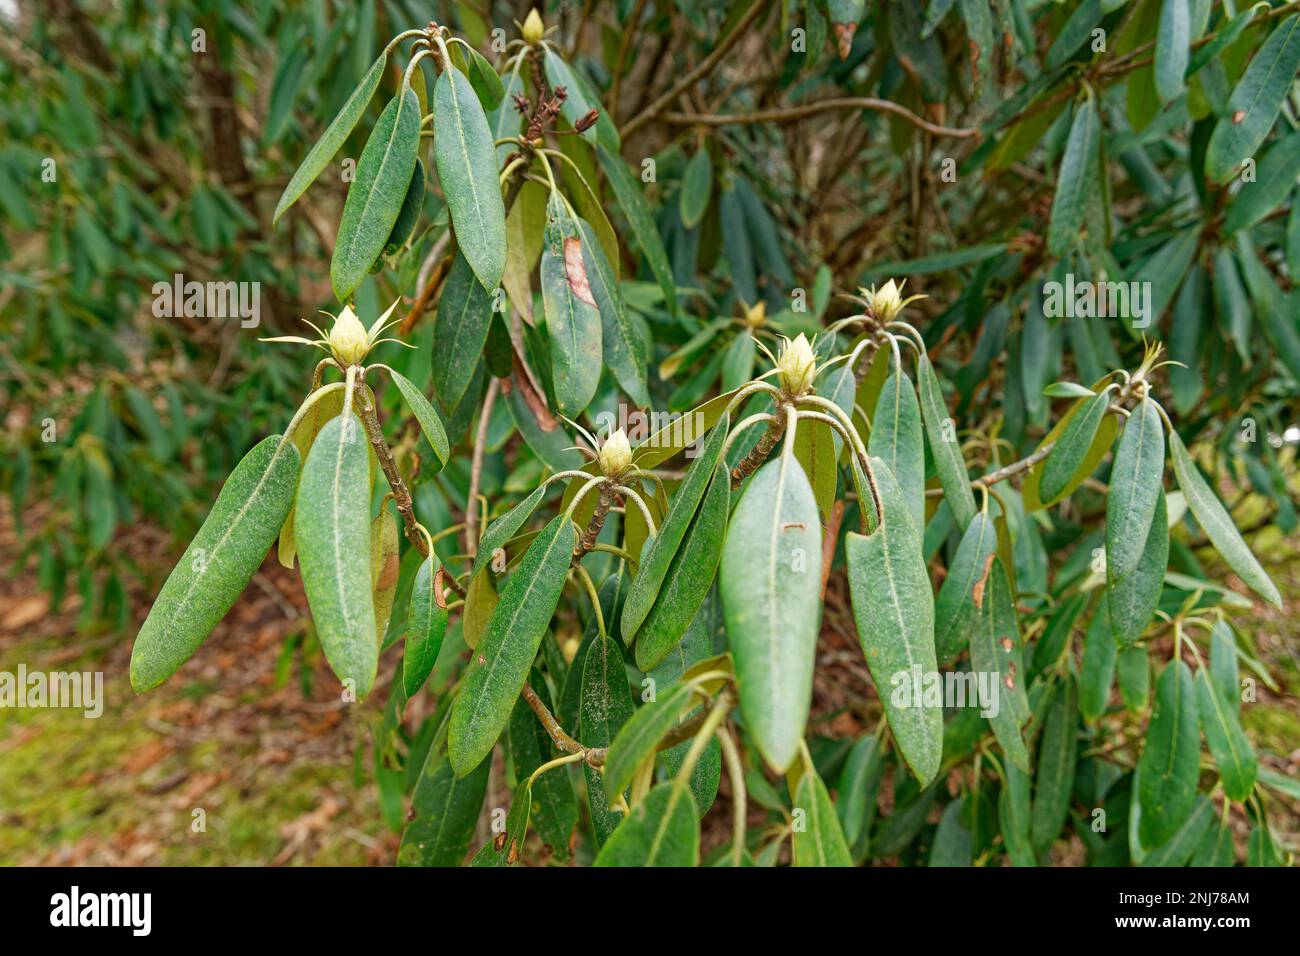 A rhododendron plant with buds surrounded by foliage ready to bloom closeup view in late wintertime Stock Photo